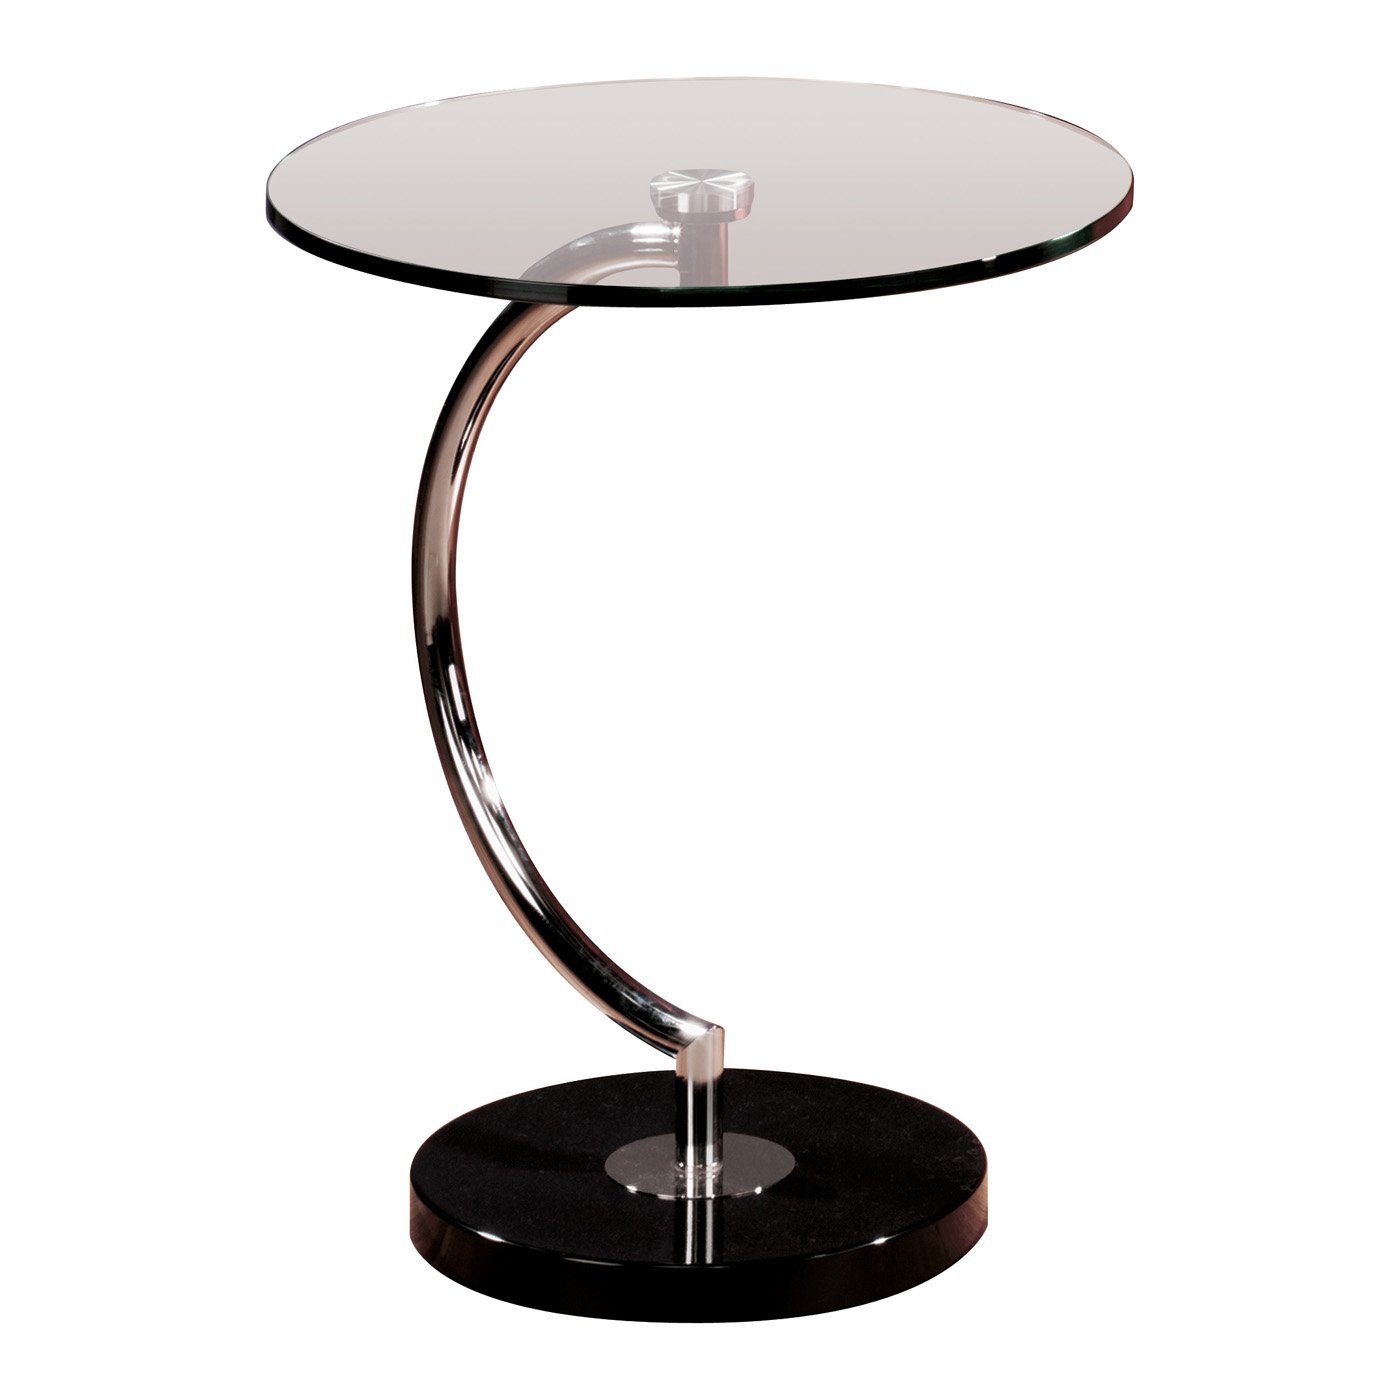 coastal accent table the super unbelievable black round end stylish shaped for your home printableboutique unique modern design contemporary glass top occasional tables vintage